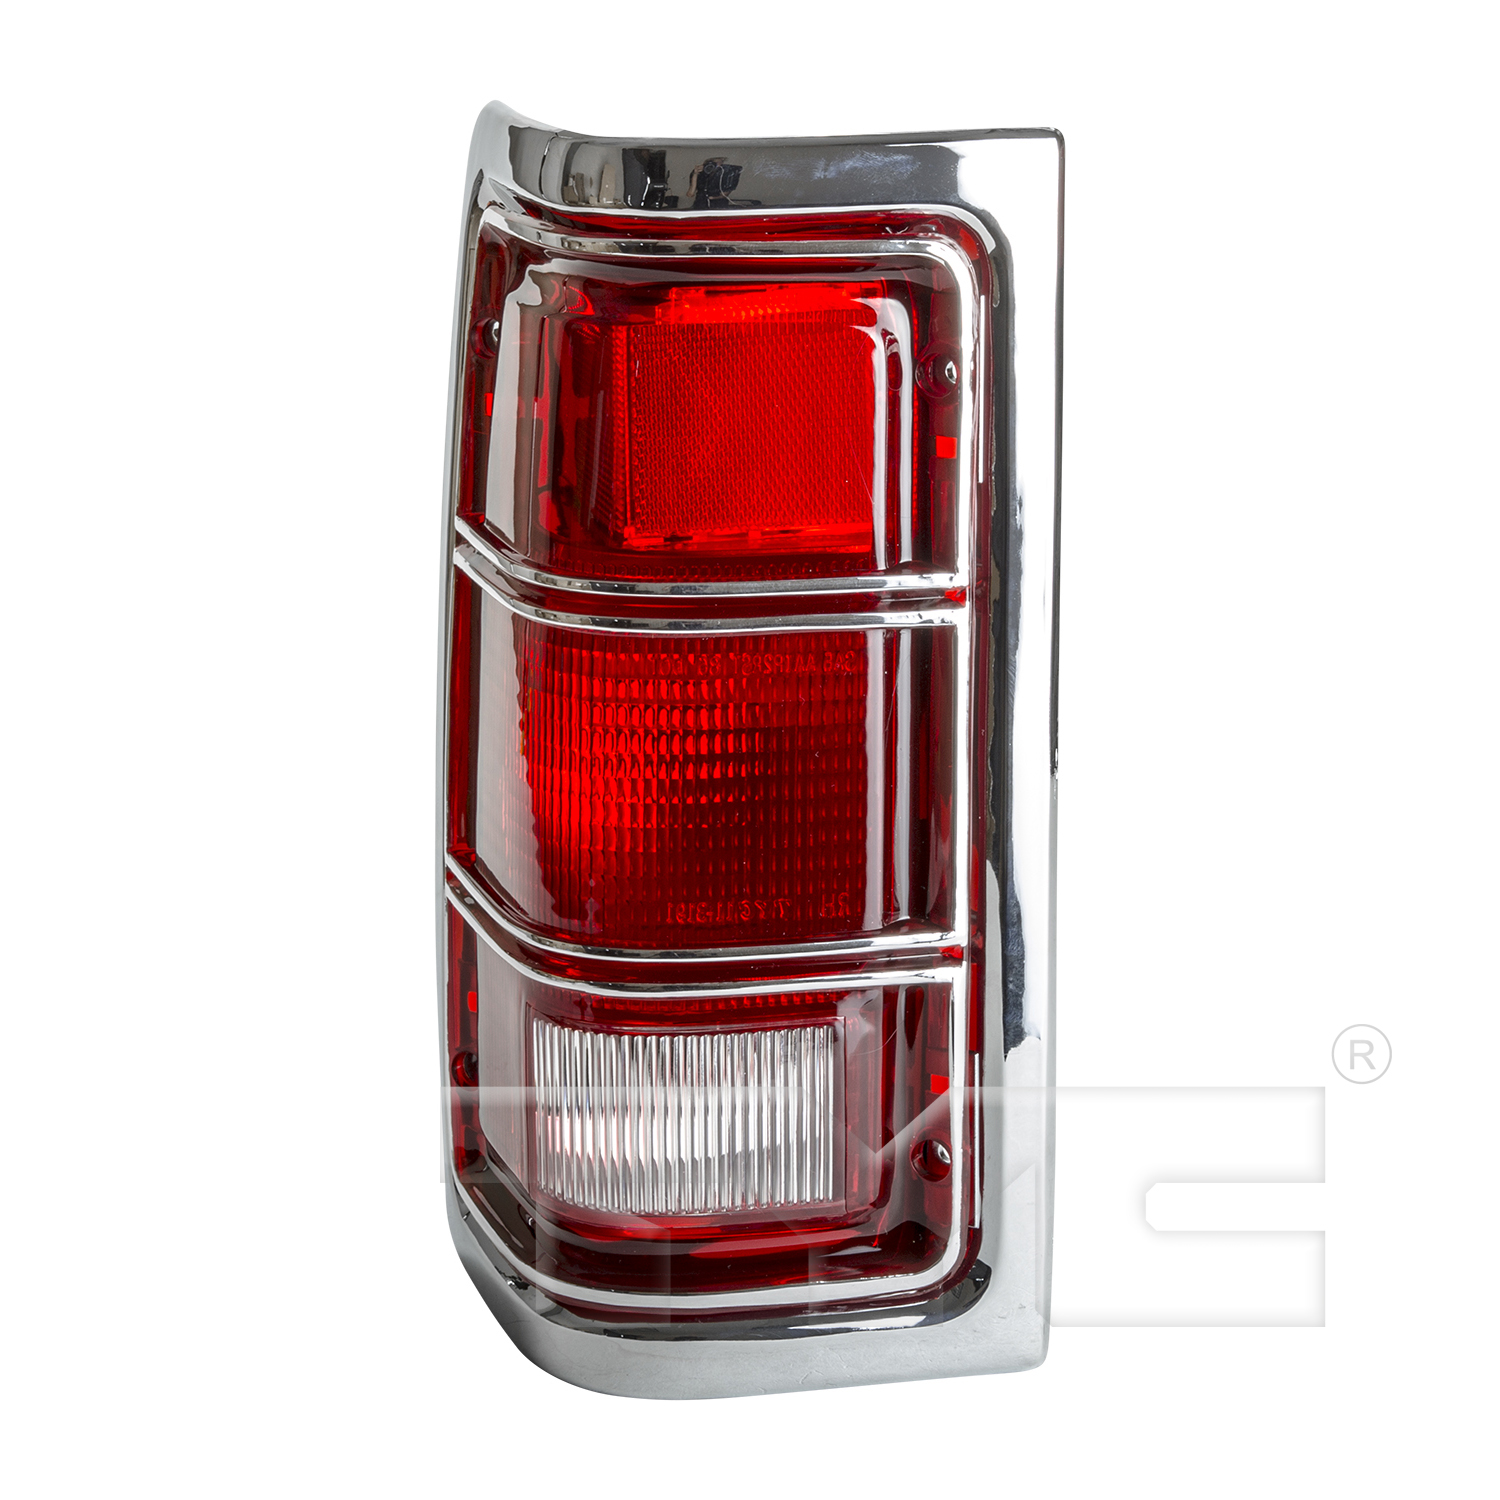 Aftermarket TAILLIGHTS for DODGE - W250, W250,81-87,LT Taillamp lens